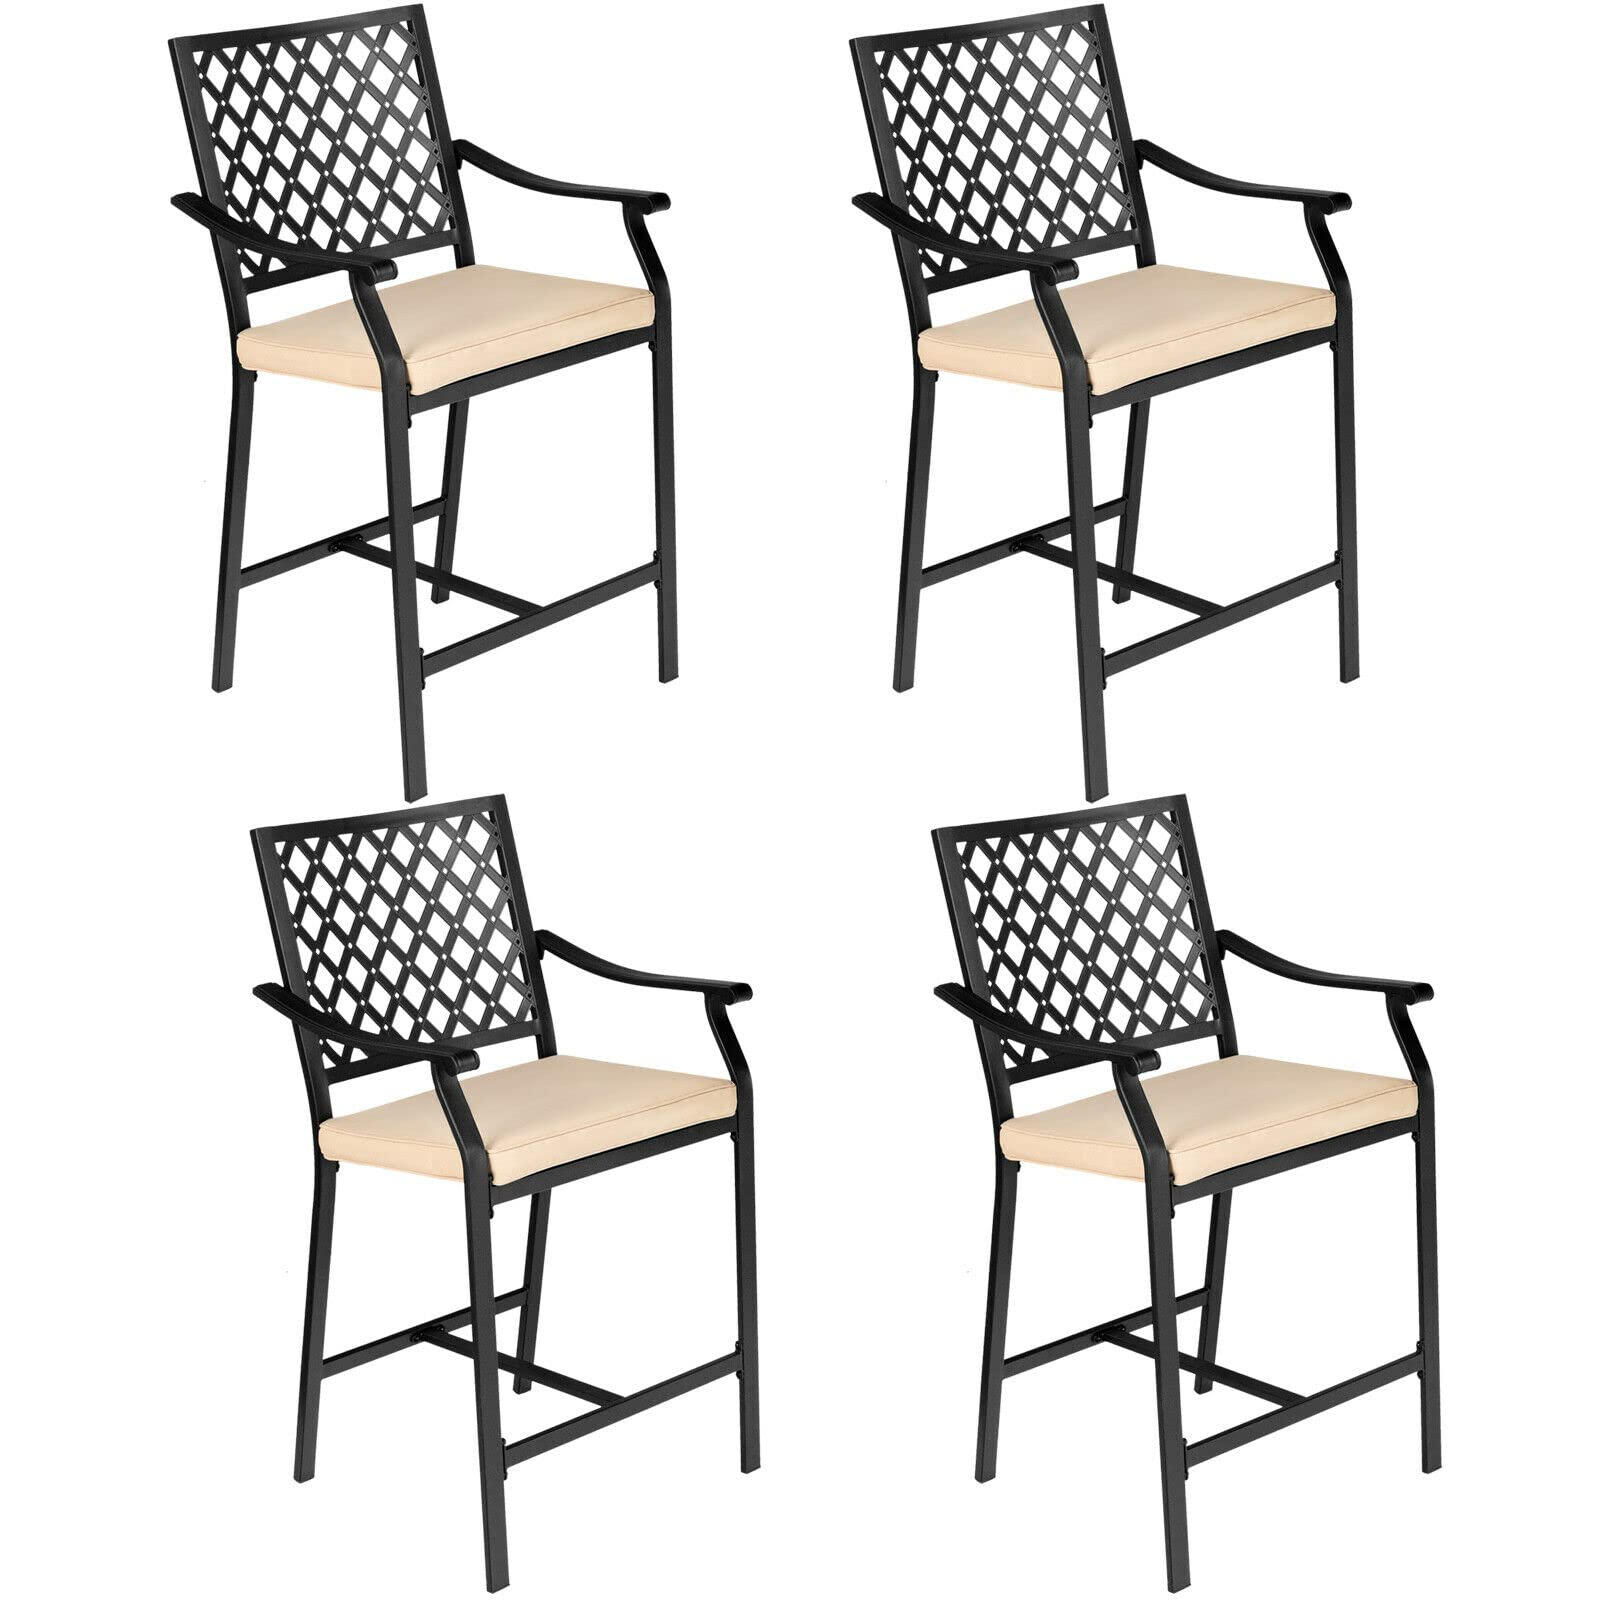 Set of 2 or 4 Patio Bar Chairs Outdoor High Chairs with Cushion Metal Bistro Stool